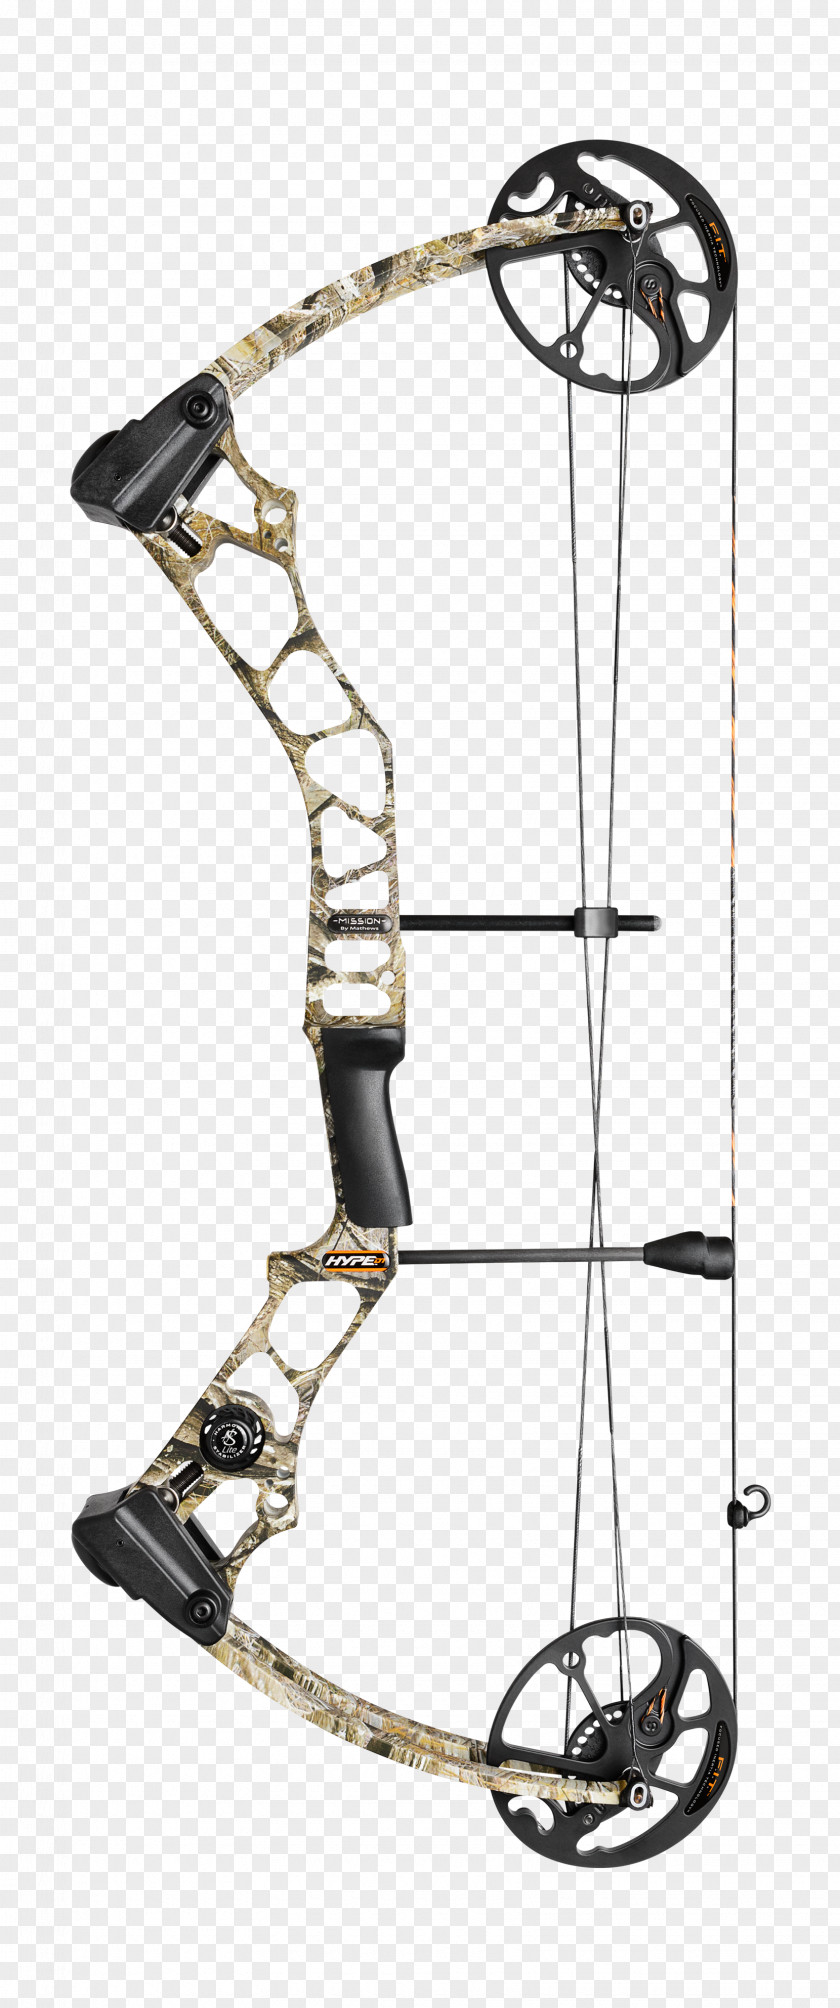 Archery Bow And Arrow Compound Bows Bowhunting PNG